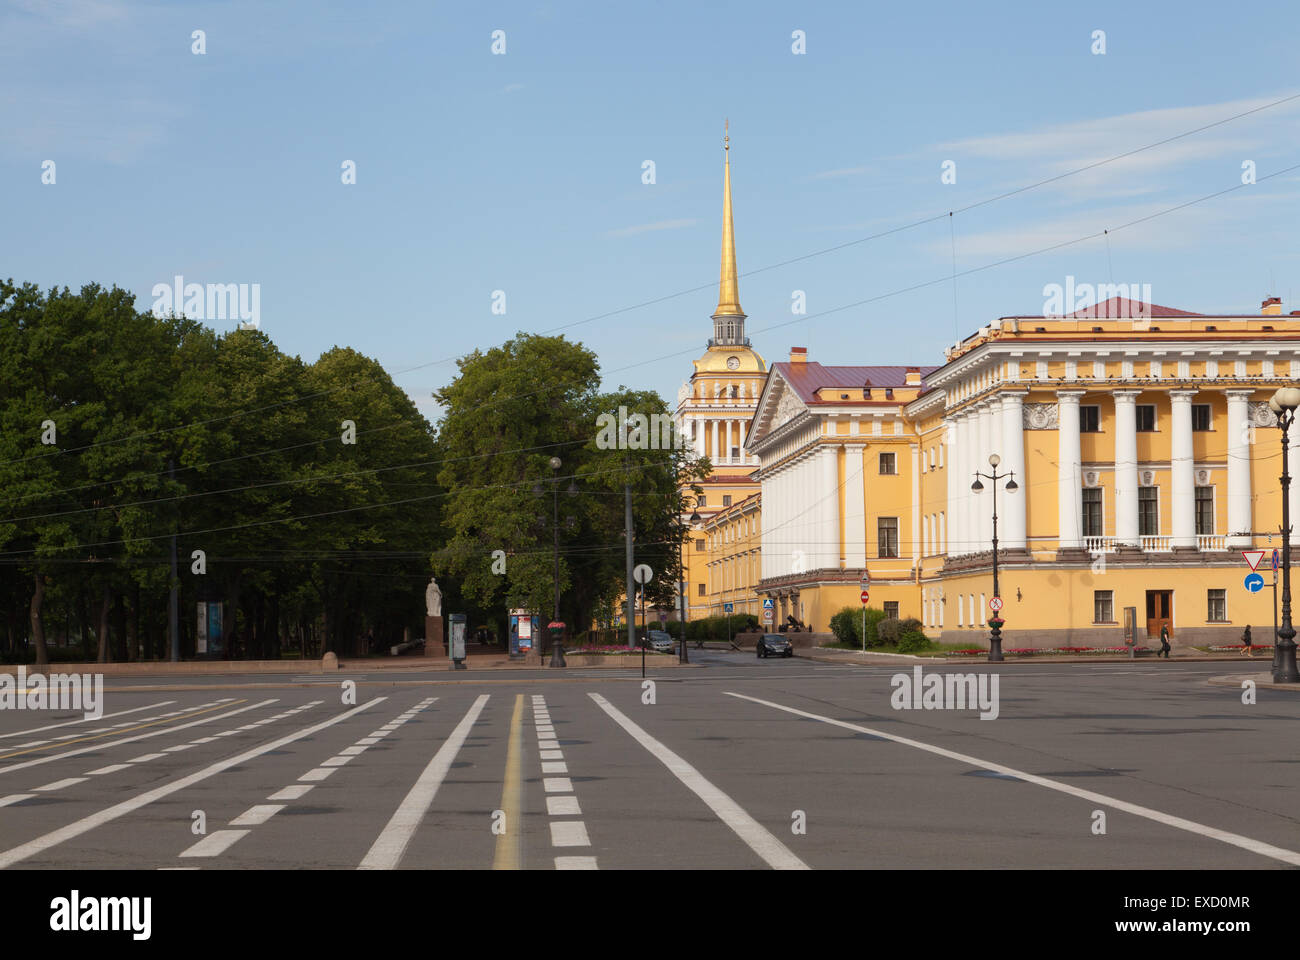 The Admiralty building, St. Petersburg, Russia. Stock Photo